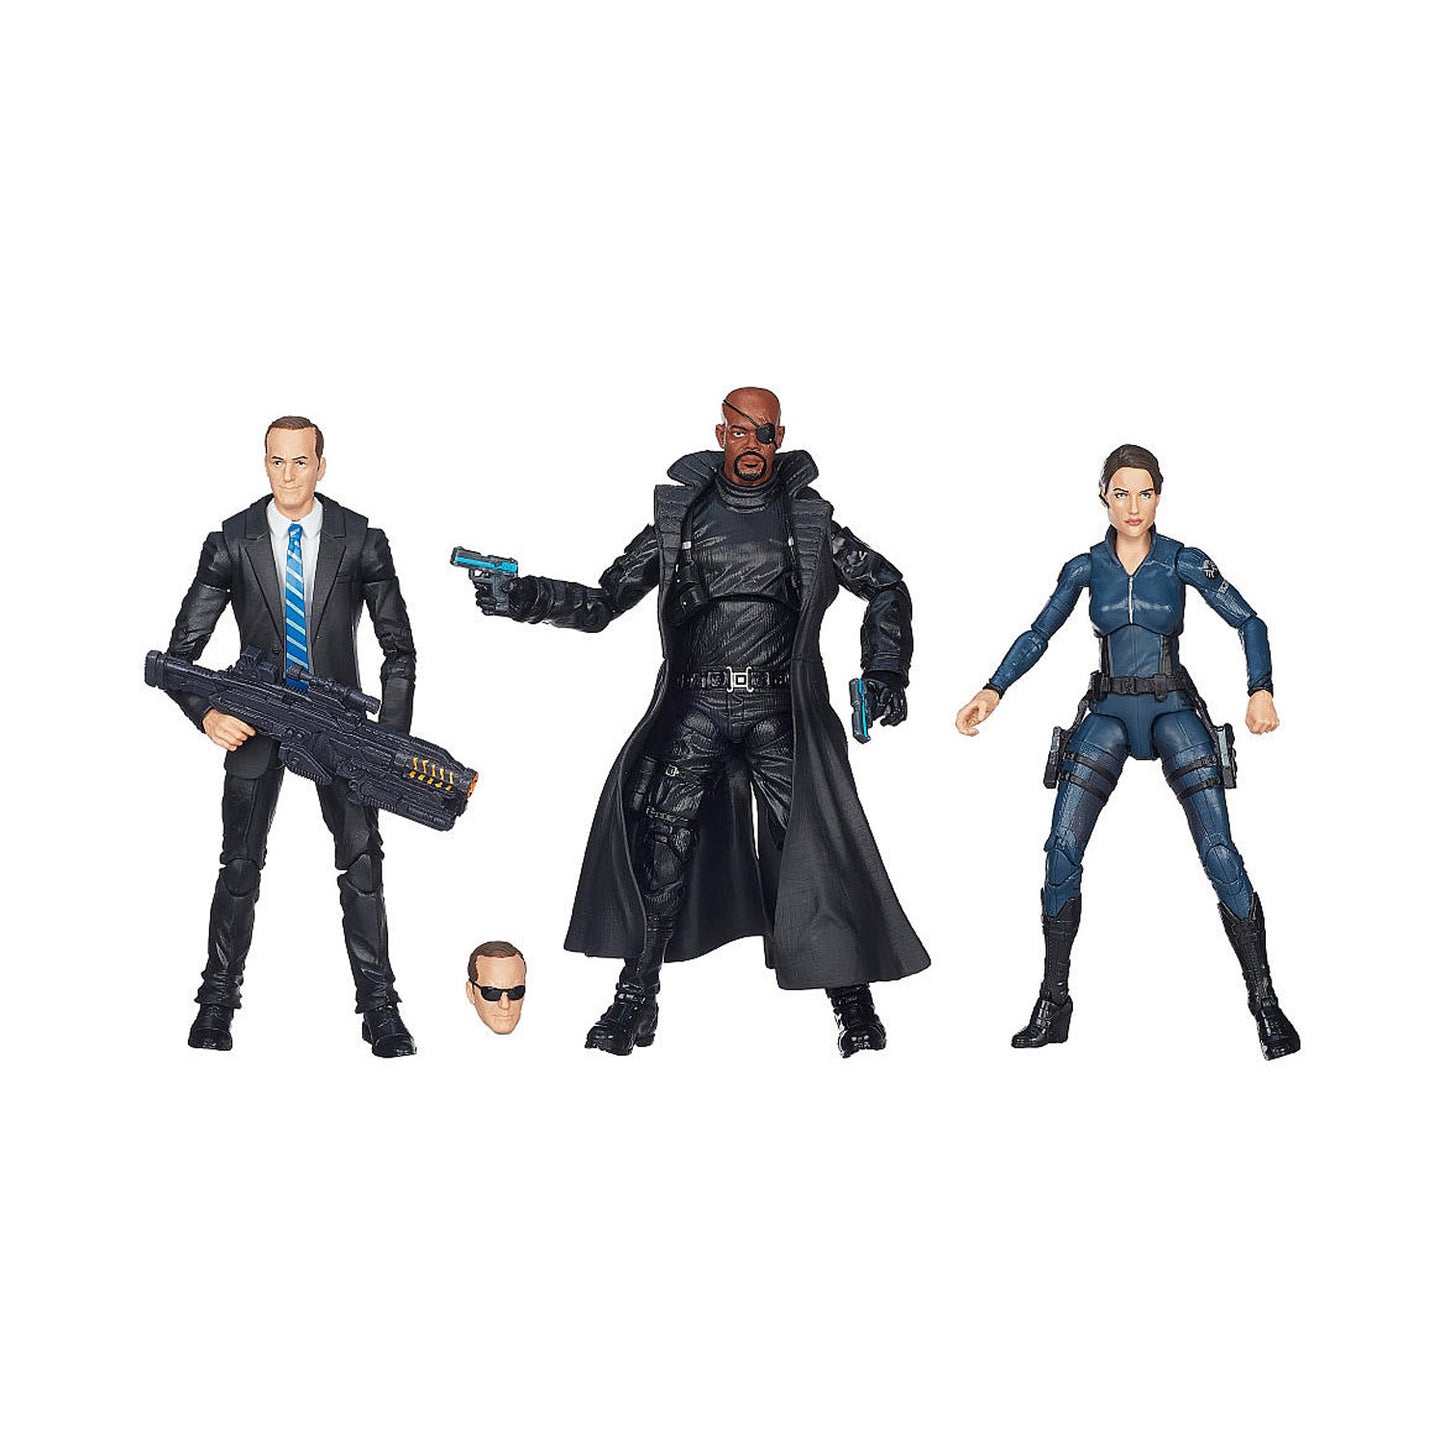 Marvel Legends S.H.I.E.L.D. Exclusive Action Figure 3-Pack (Agent Coulson, Nick Fury, Maria Hill)